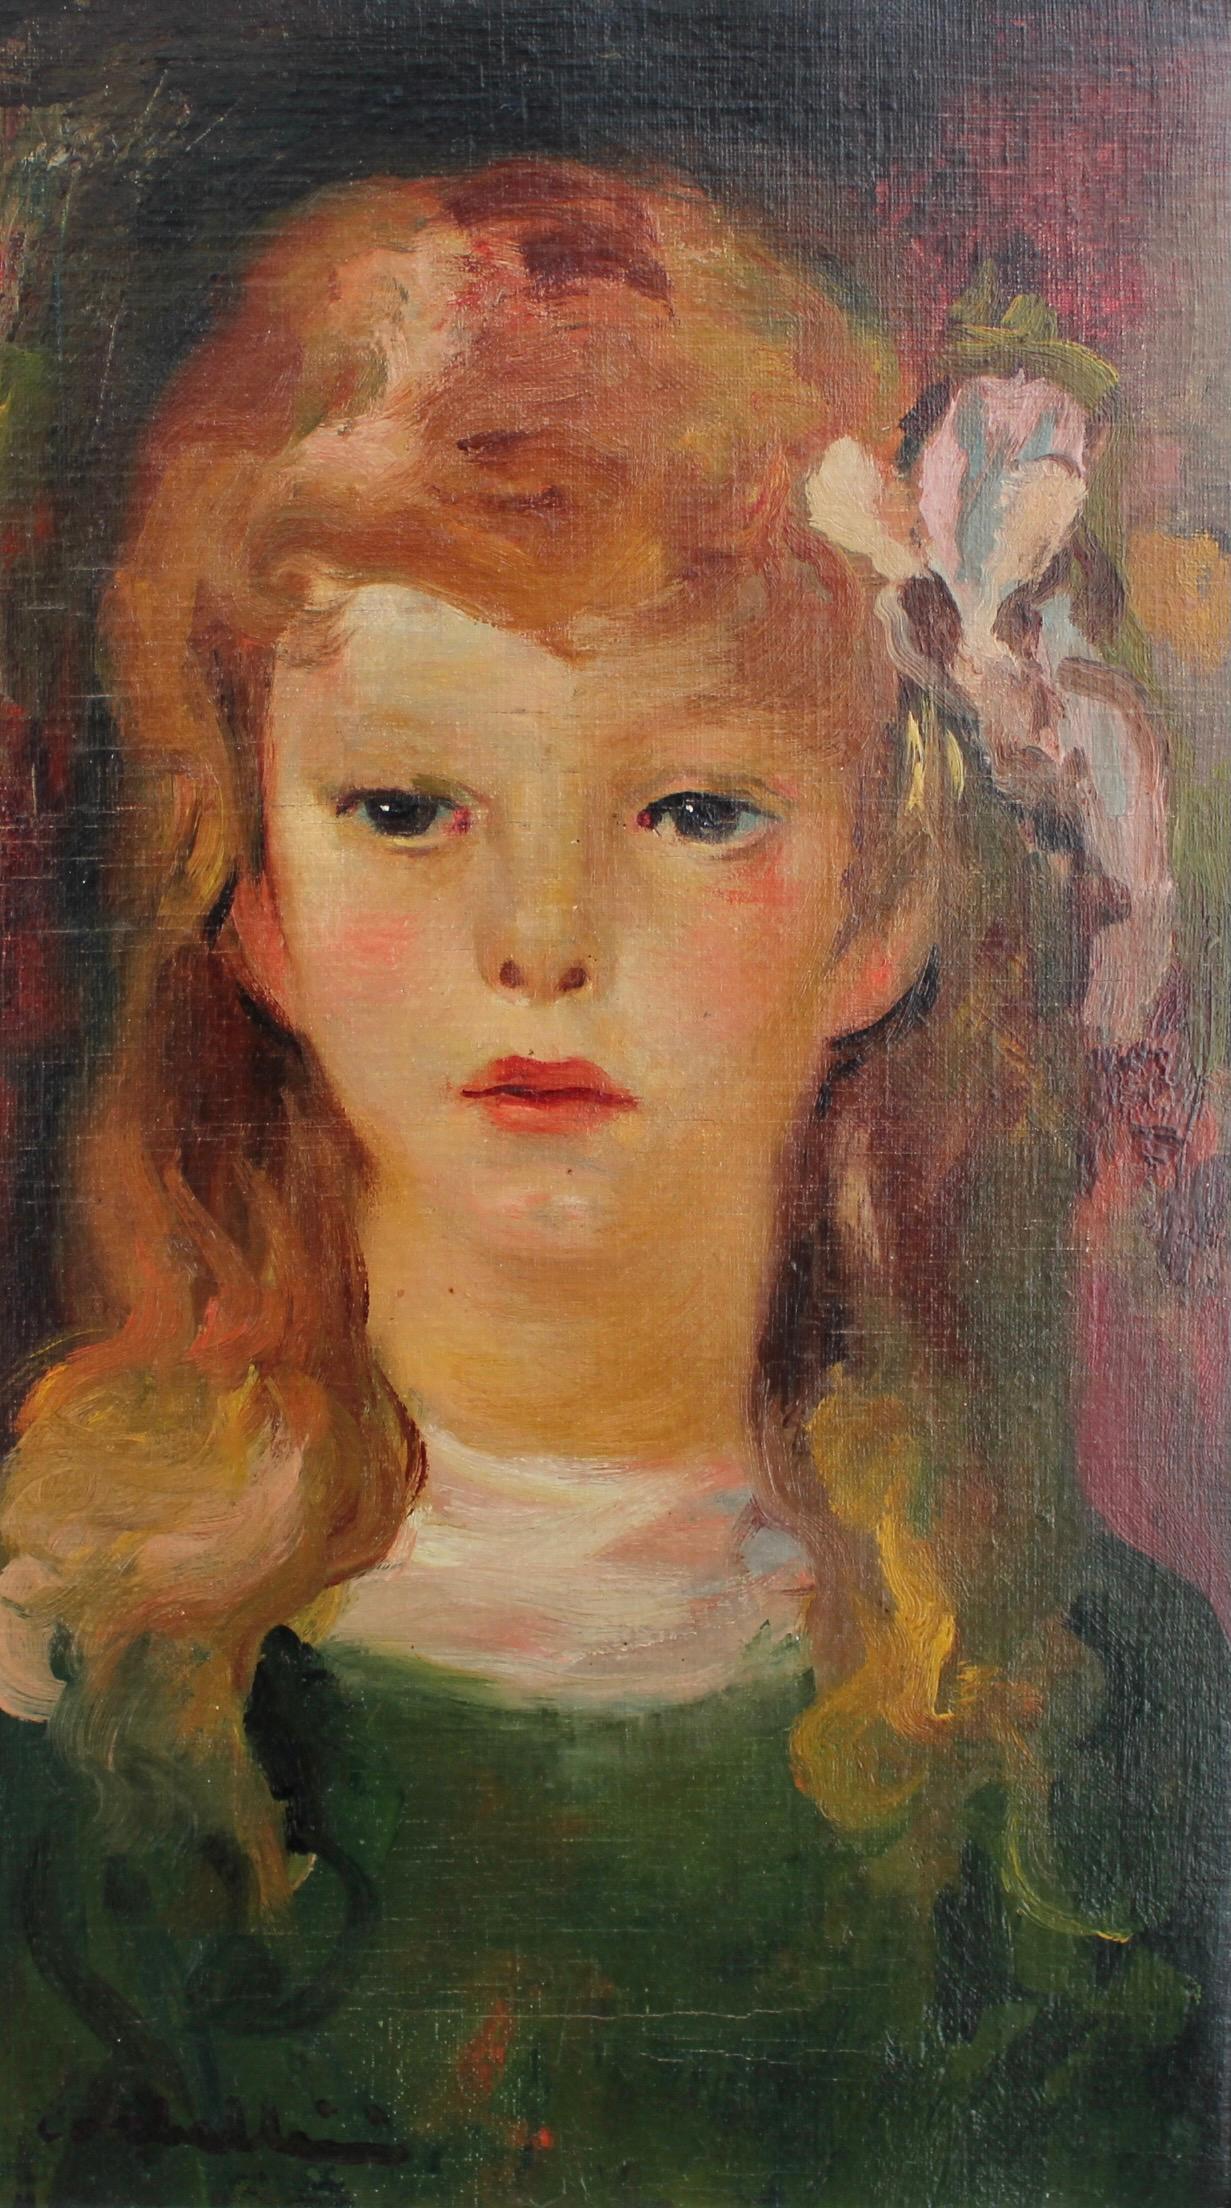 Portrait of Girl with Bow in Her Hair - Painting by Luigi Corbellini